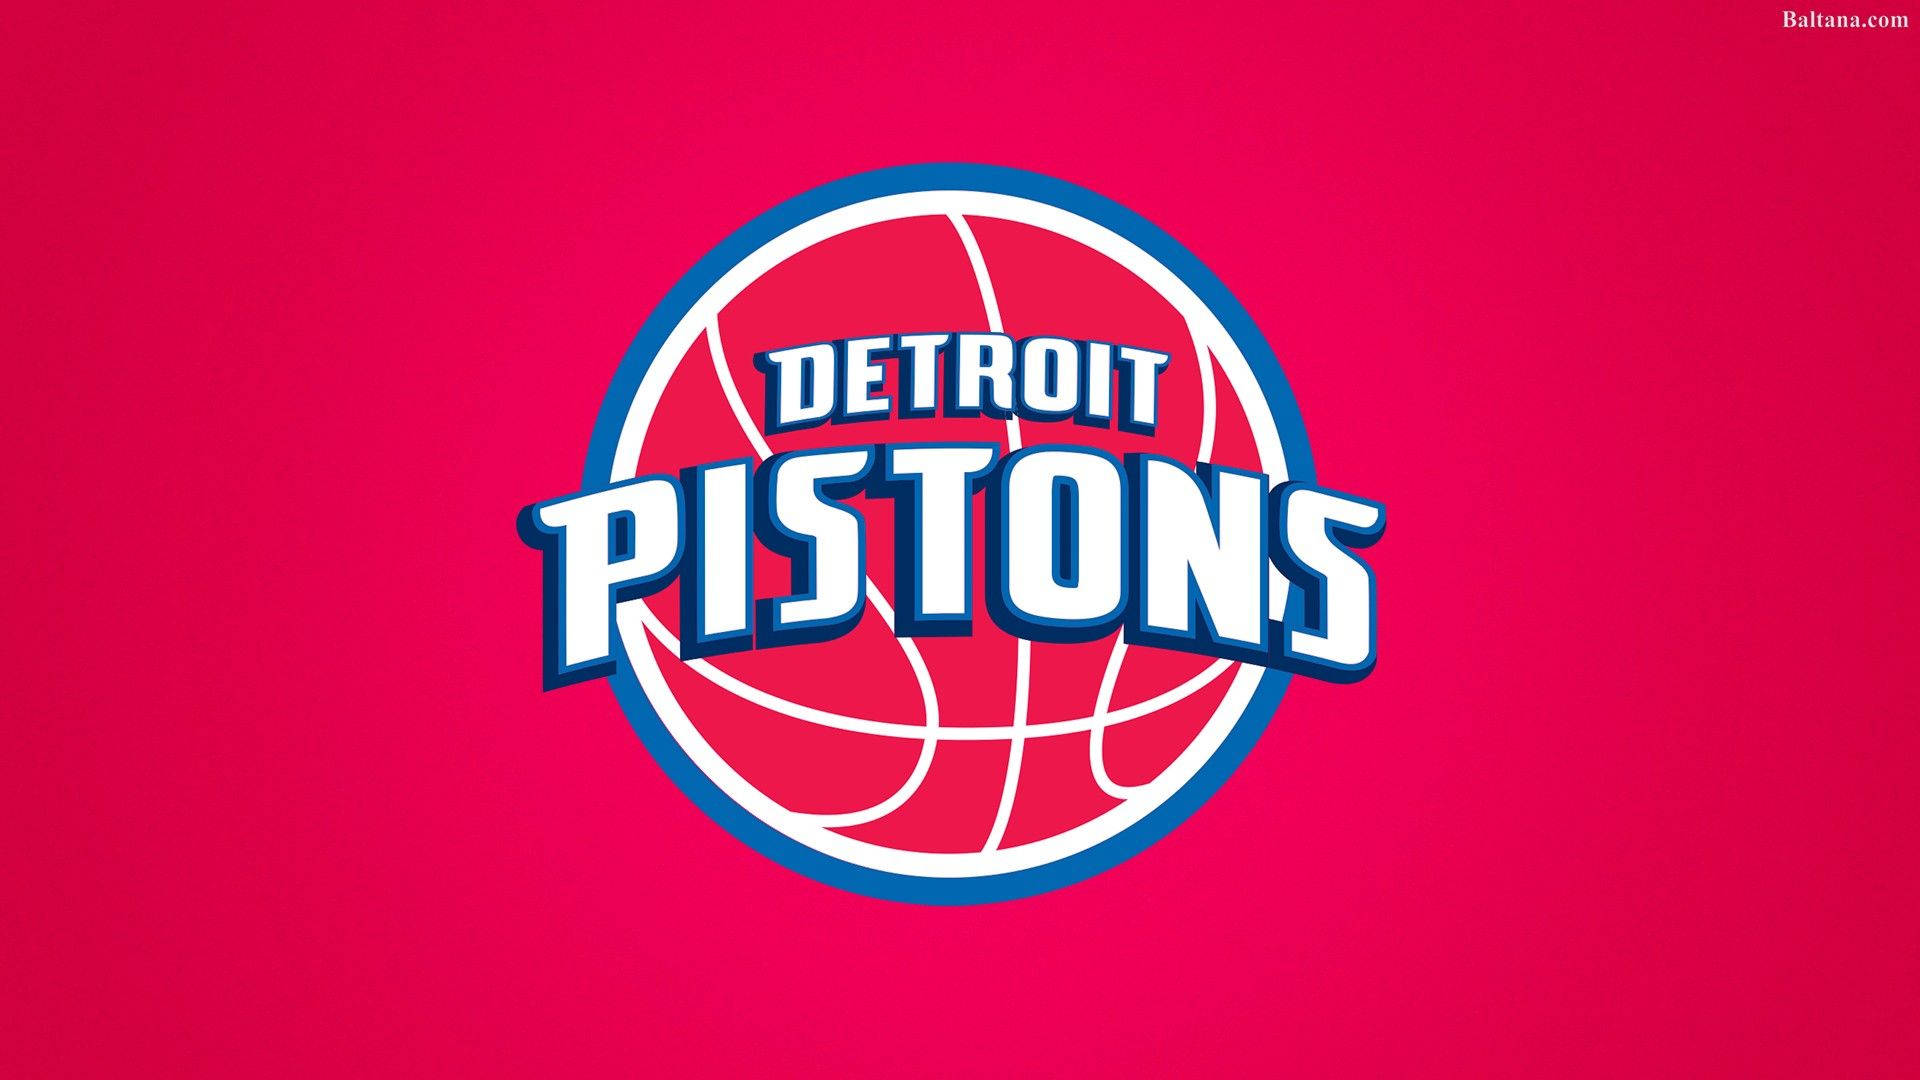 The Detroit Pistons In Action Background